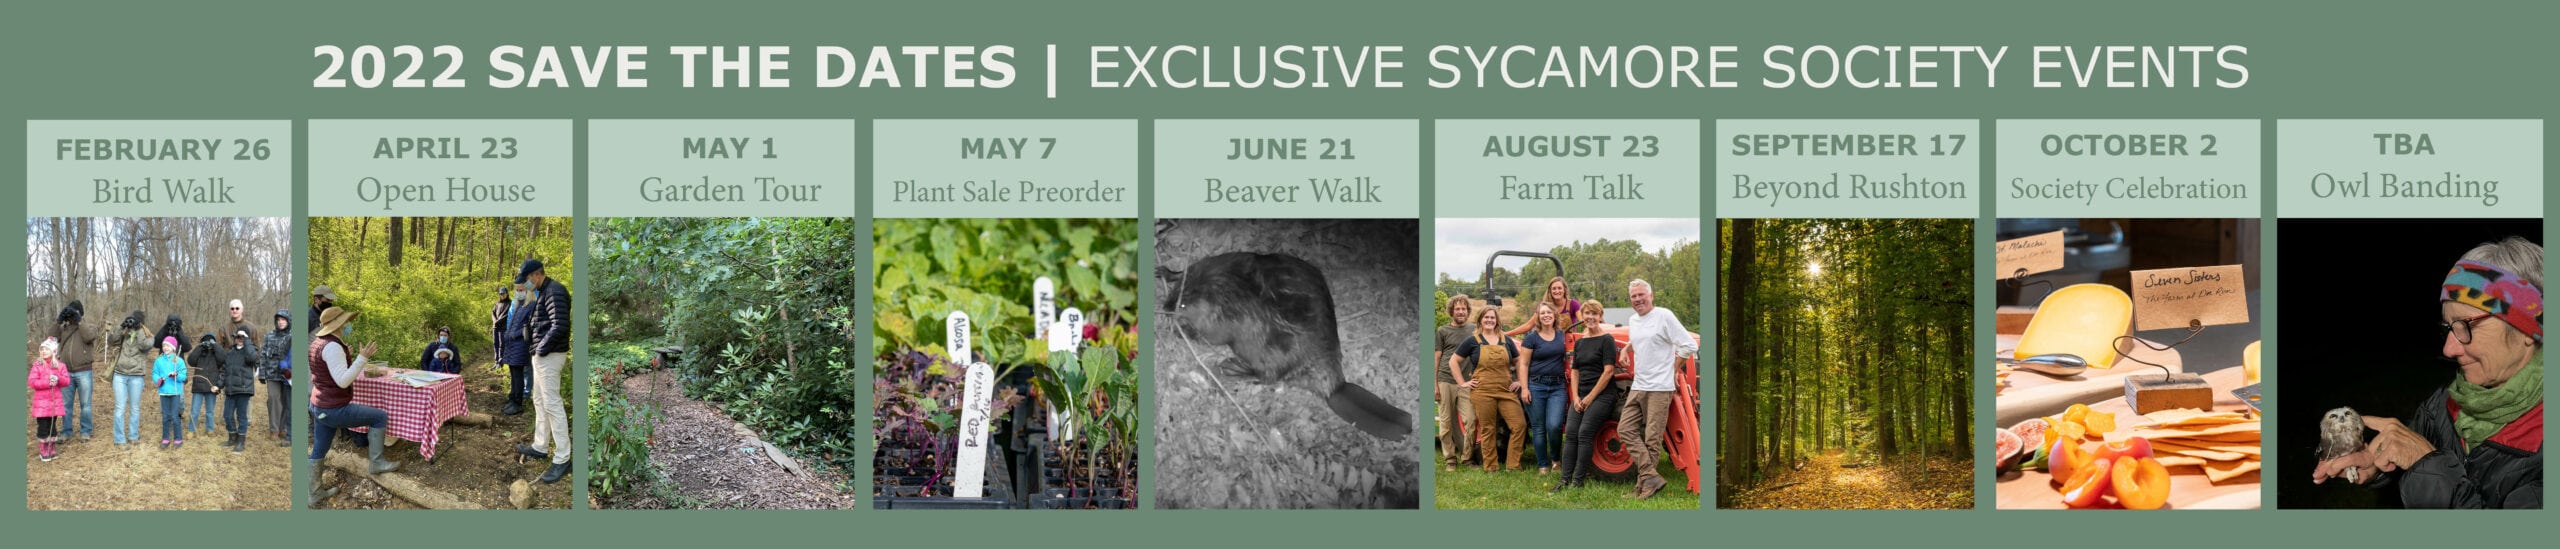 Sycamore Society 2022 Events Postcard_banner for website3